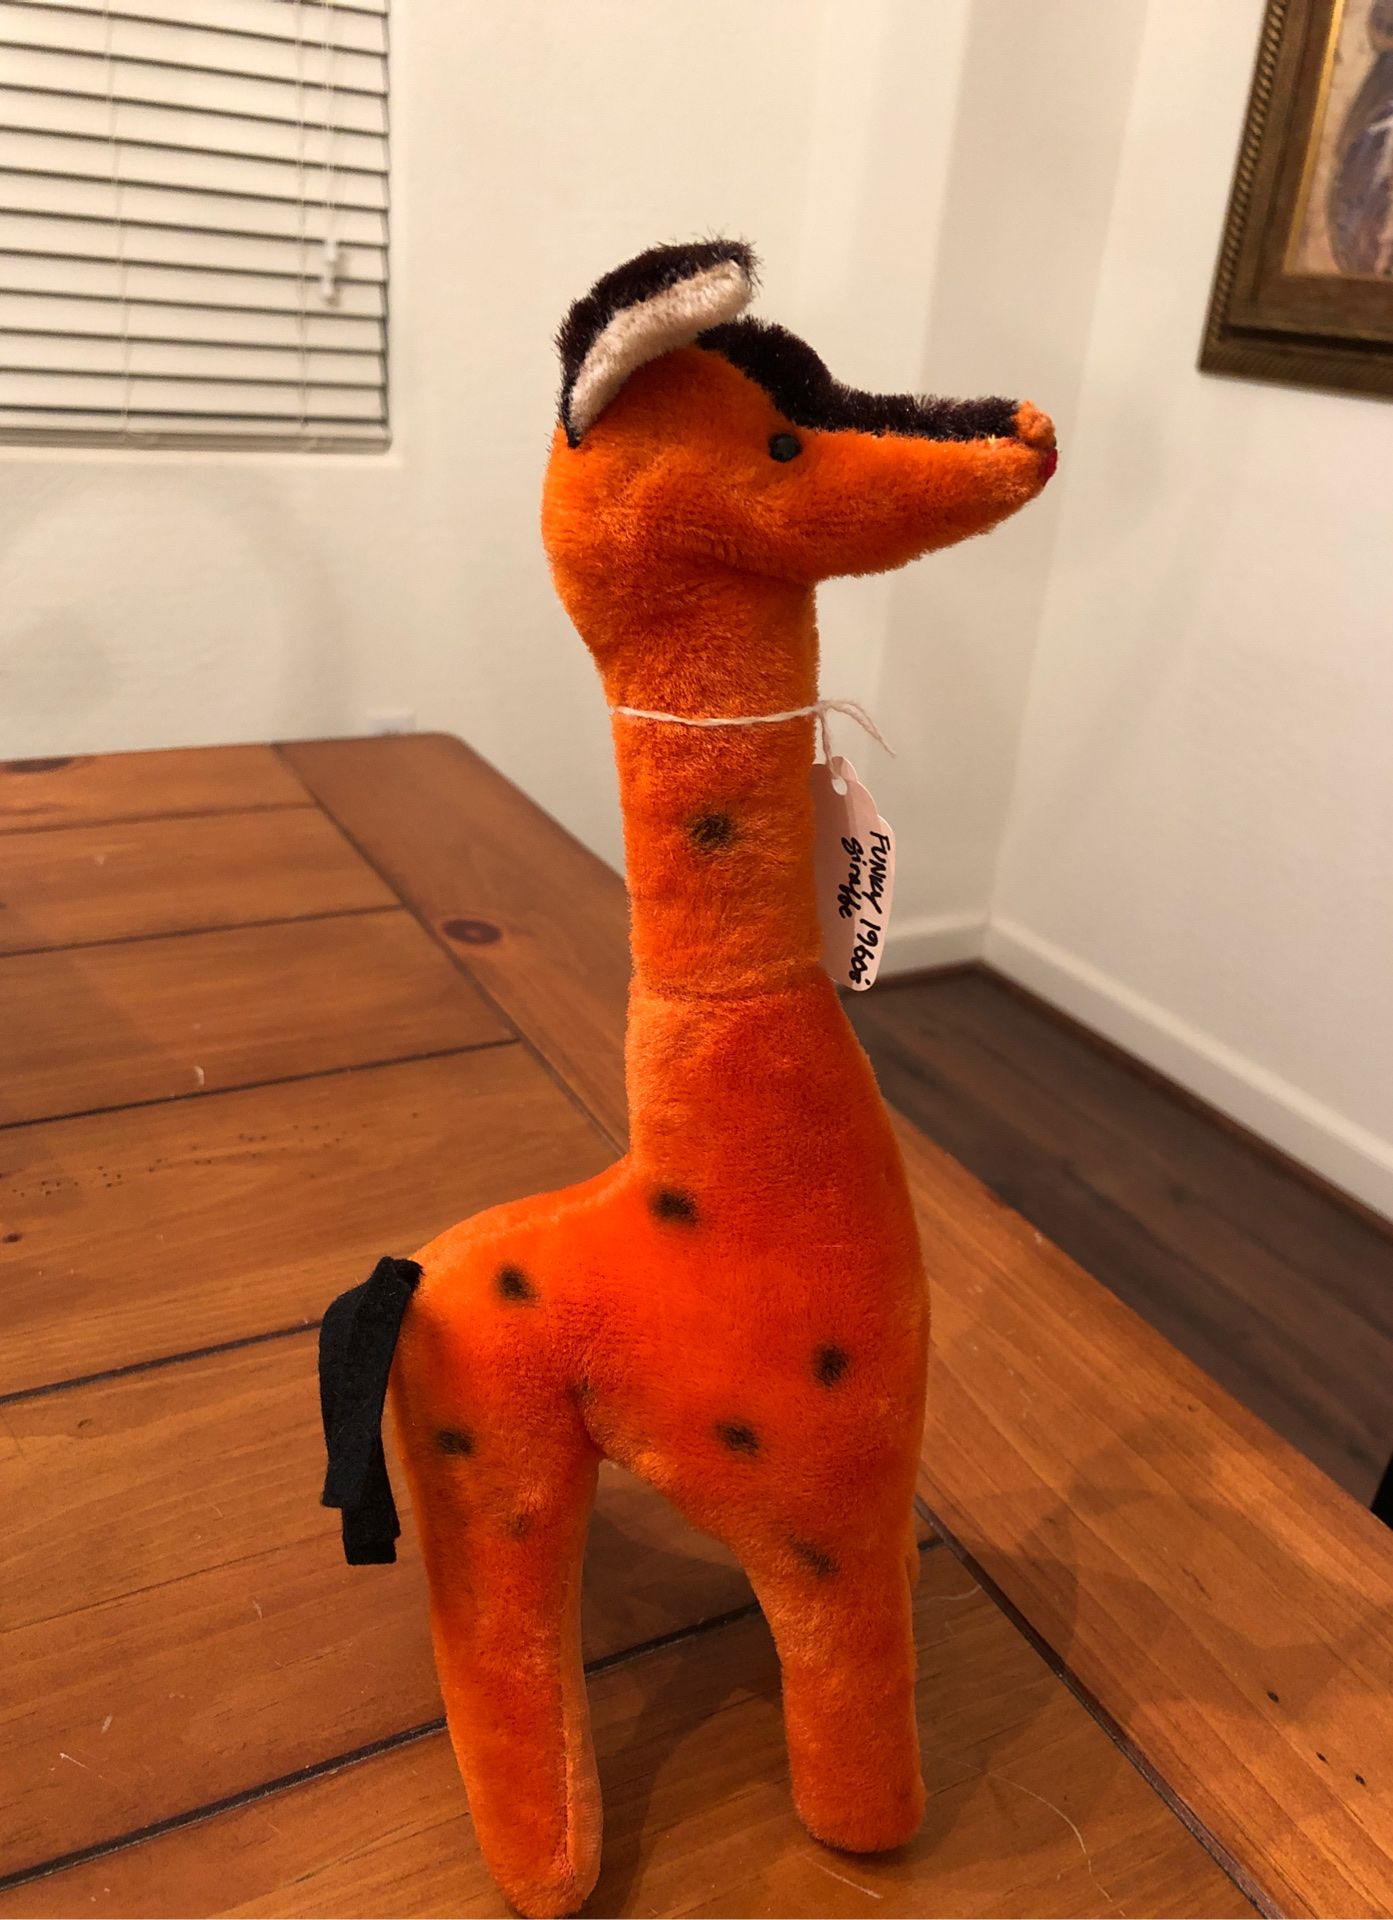 Quirky 1960s giraffe stuffed toy - MCM - nursery We’re cute with an antique doll or teddy bear